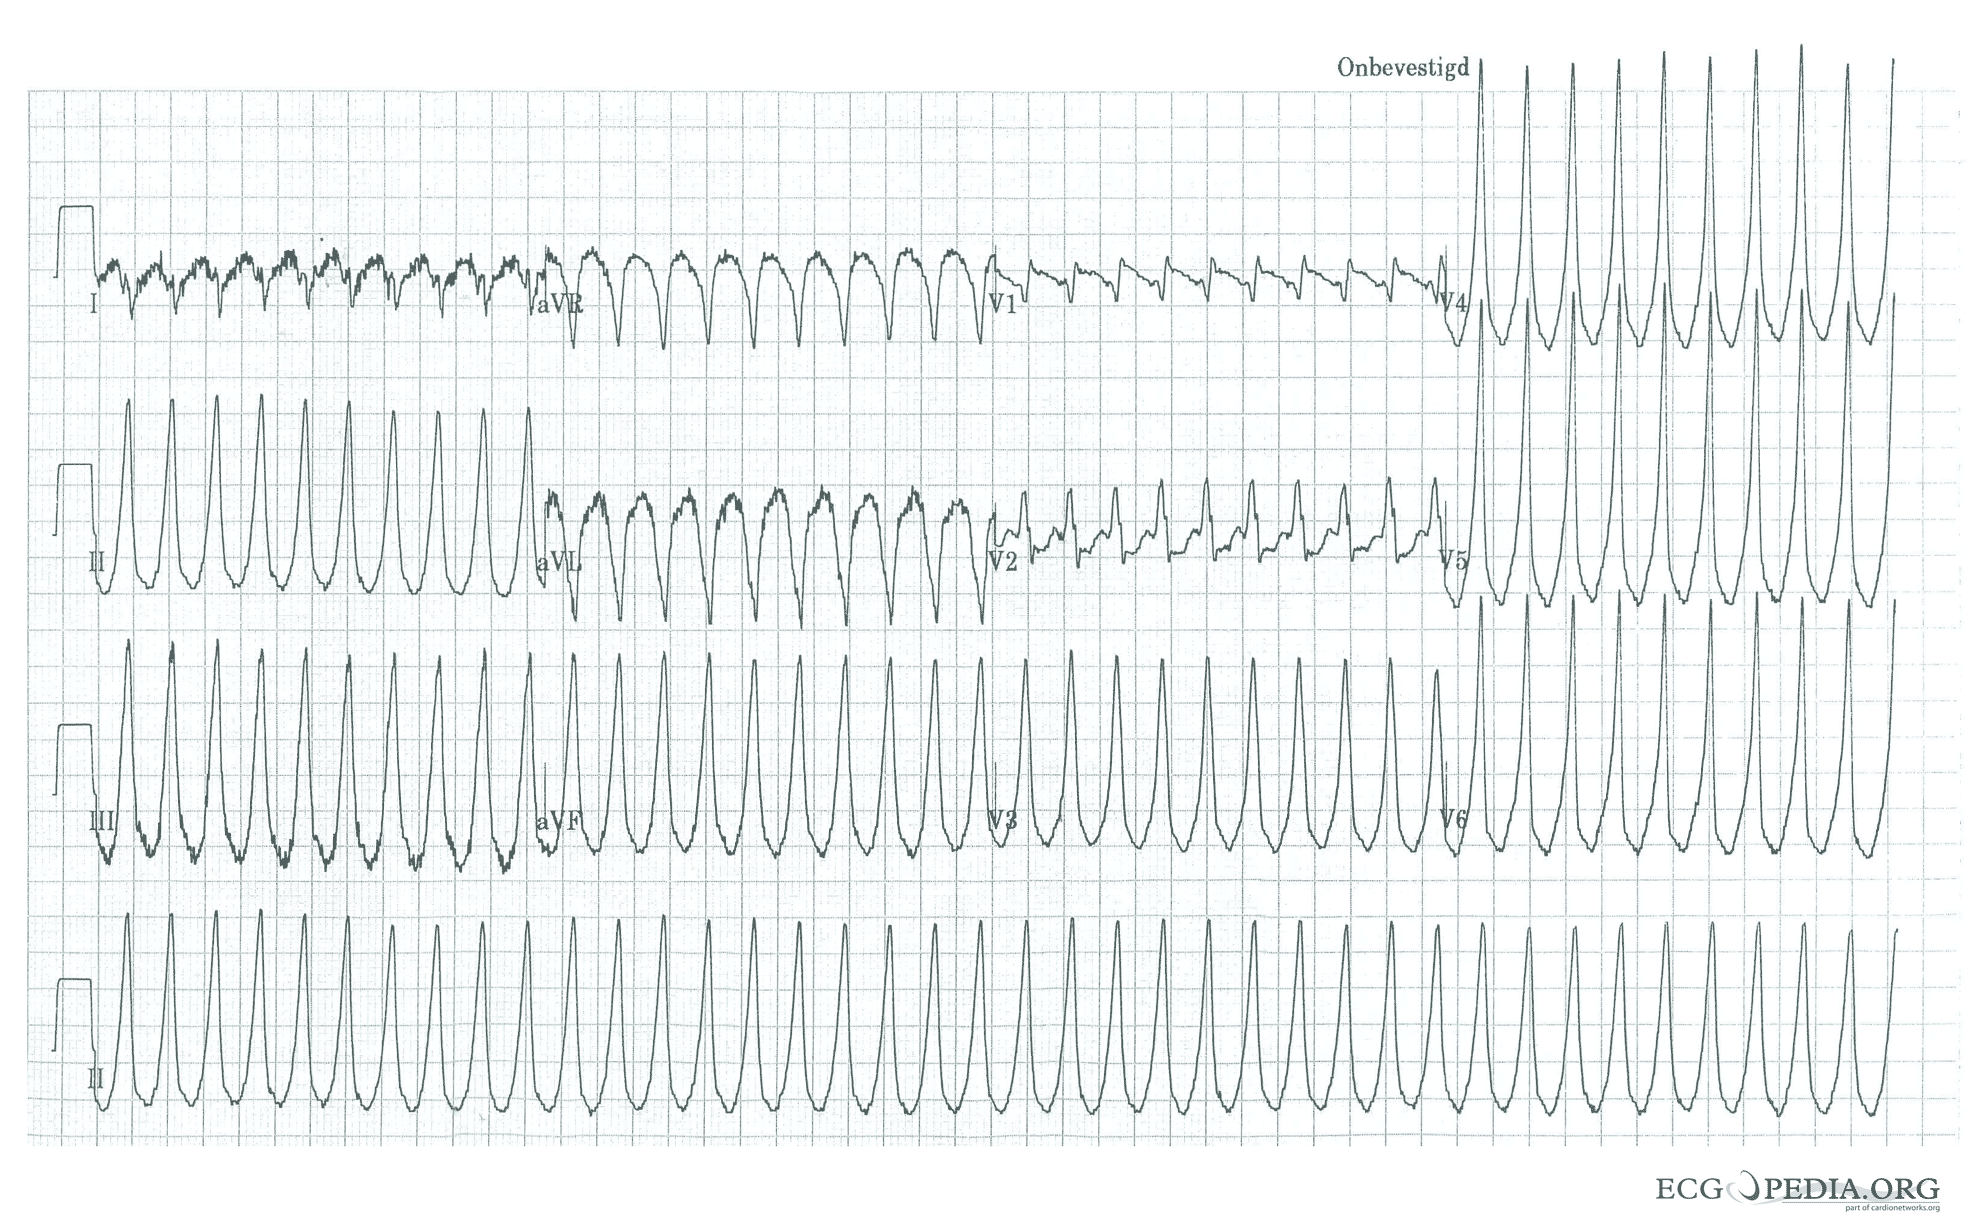 Ventricular tachycardia of 250 bpm with a right bundle branch block pattern and right heart axis.